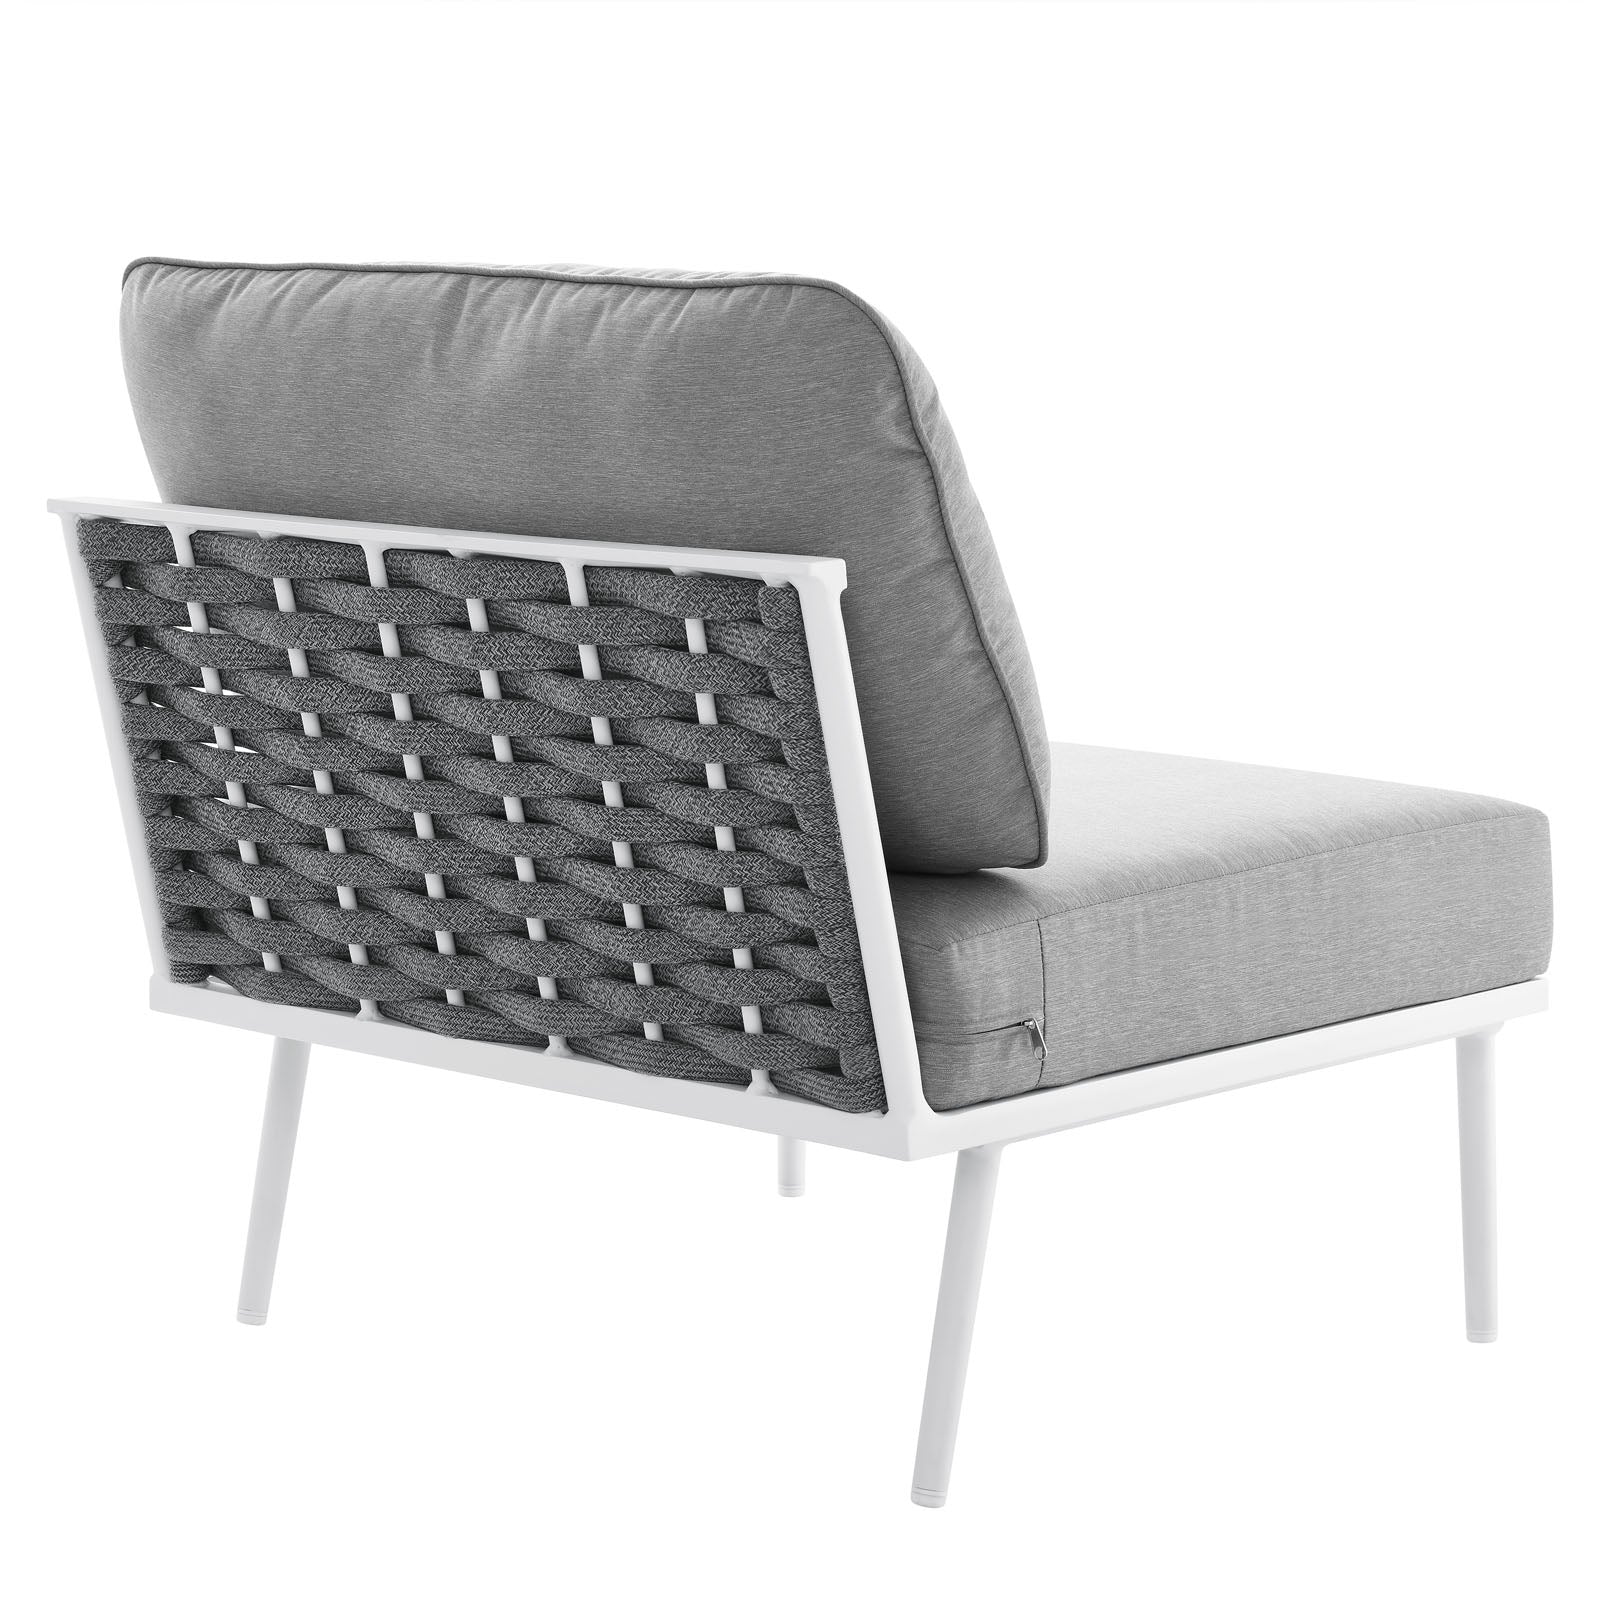 Stance Outdoor Patio Aluminum Armless Chair-Outdoor Chair-Modway-Wall2Wall Furnishings